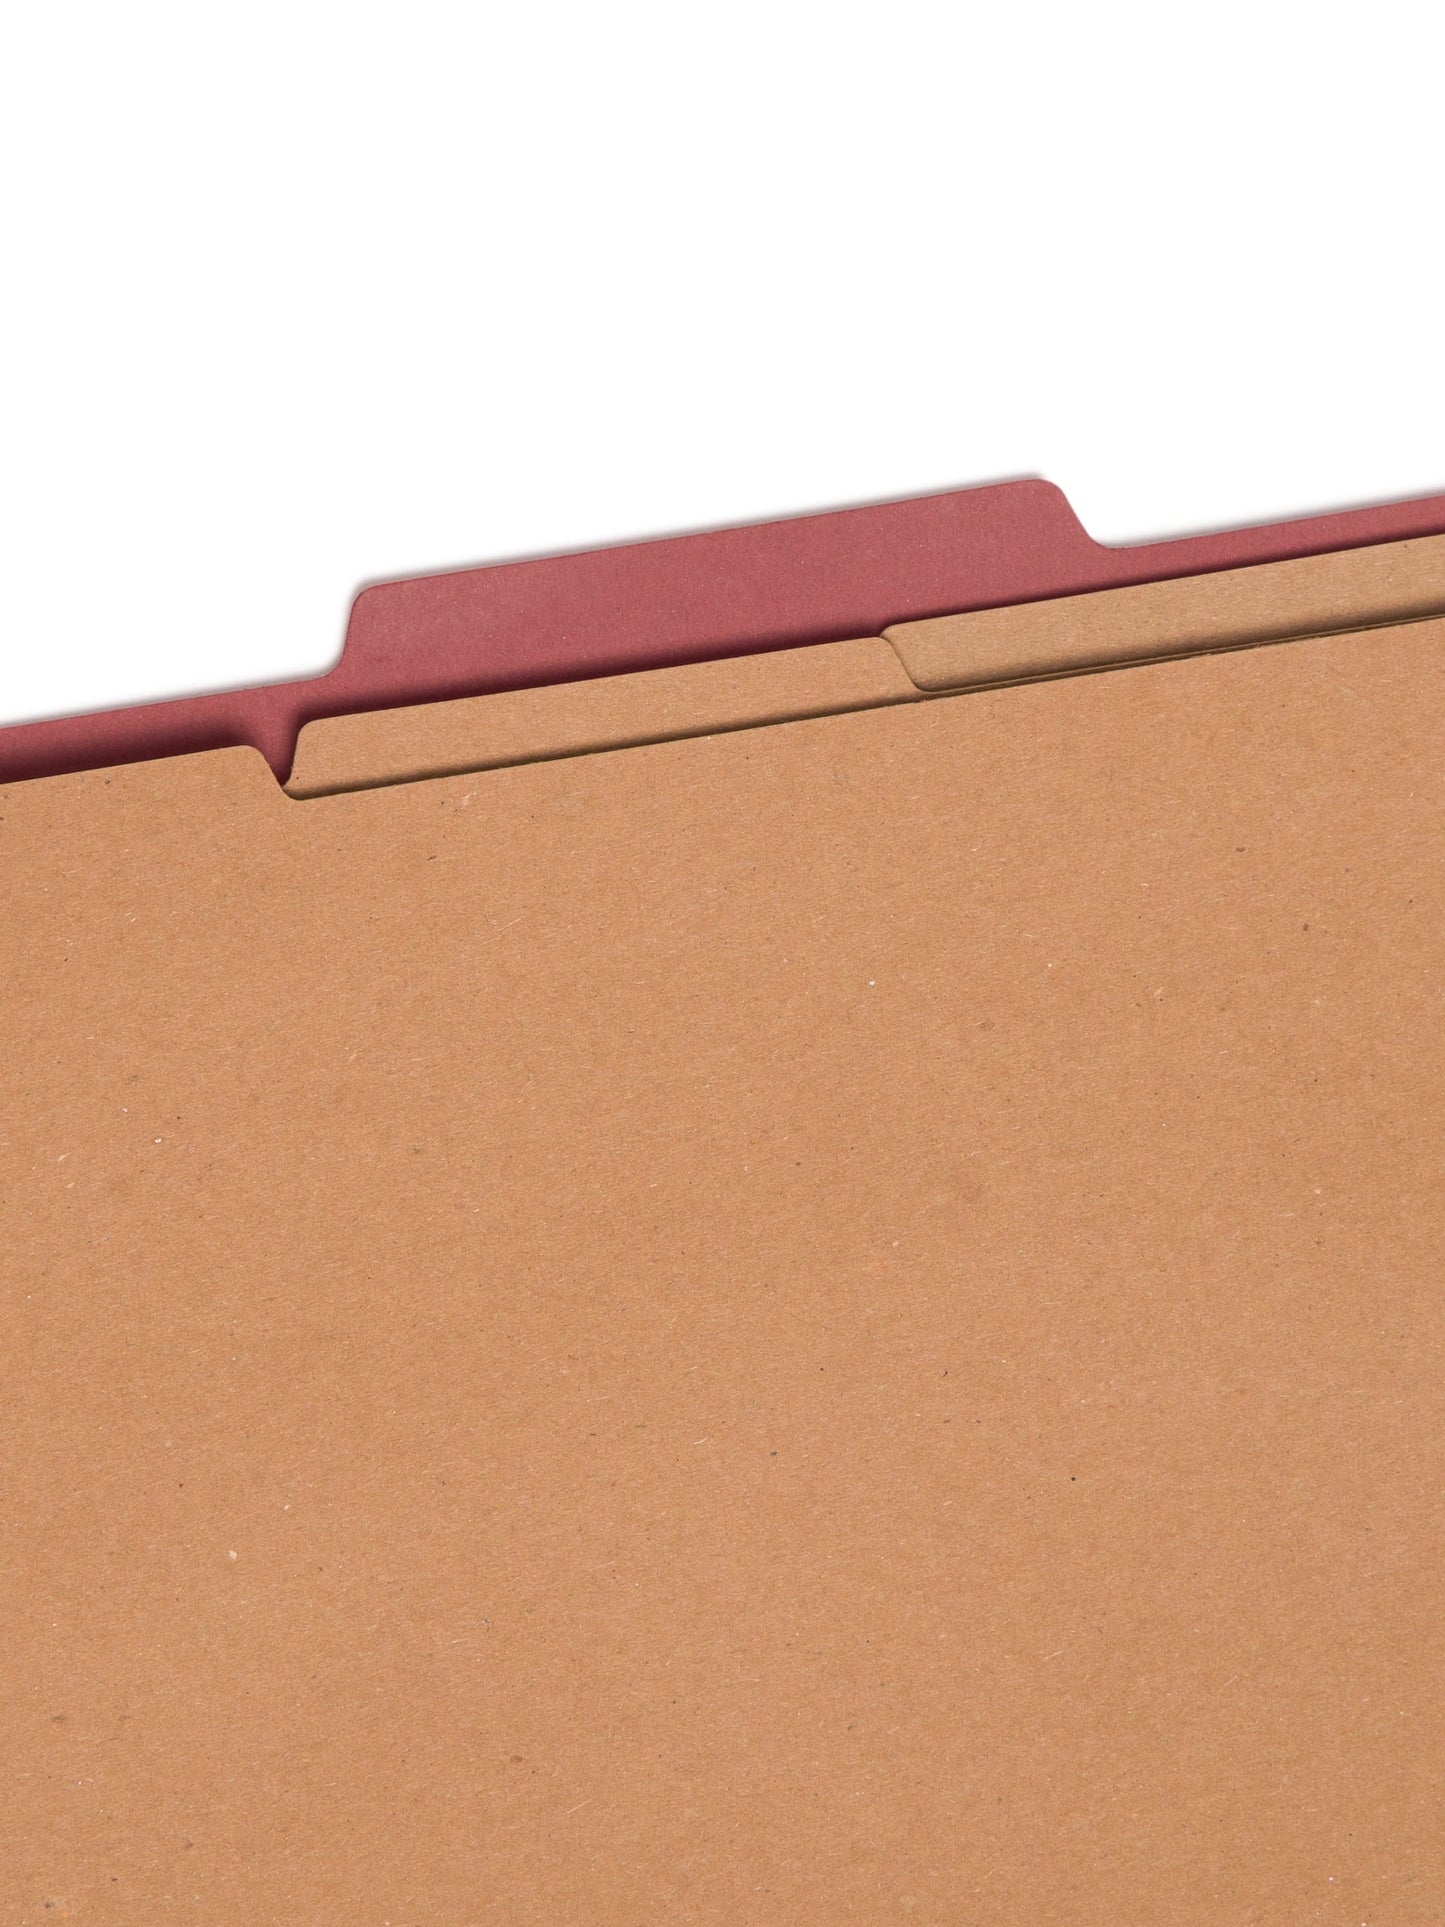 Pressboard Classification File Folders, 3 Dividers, 3 inch Expansion, Red Color, Legal Size, Set of 0, 30086486190993